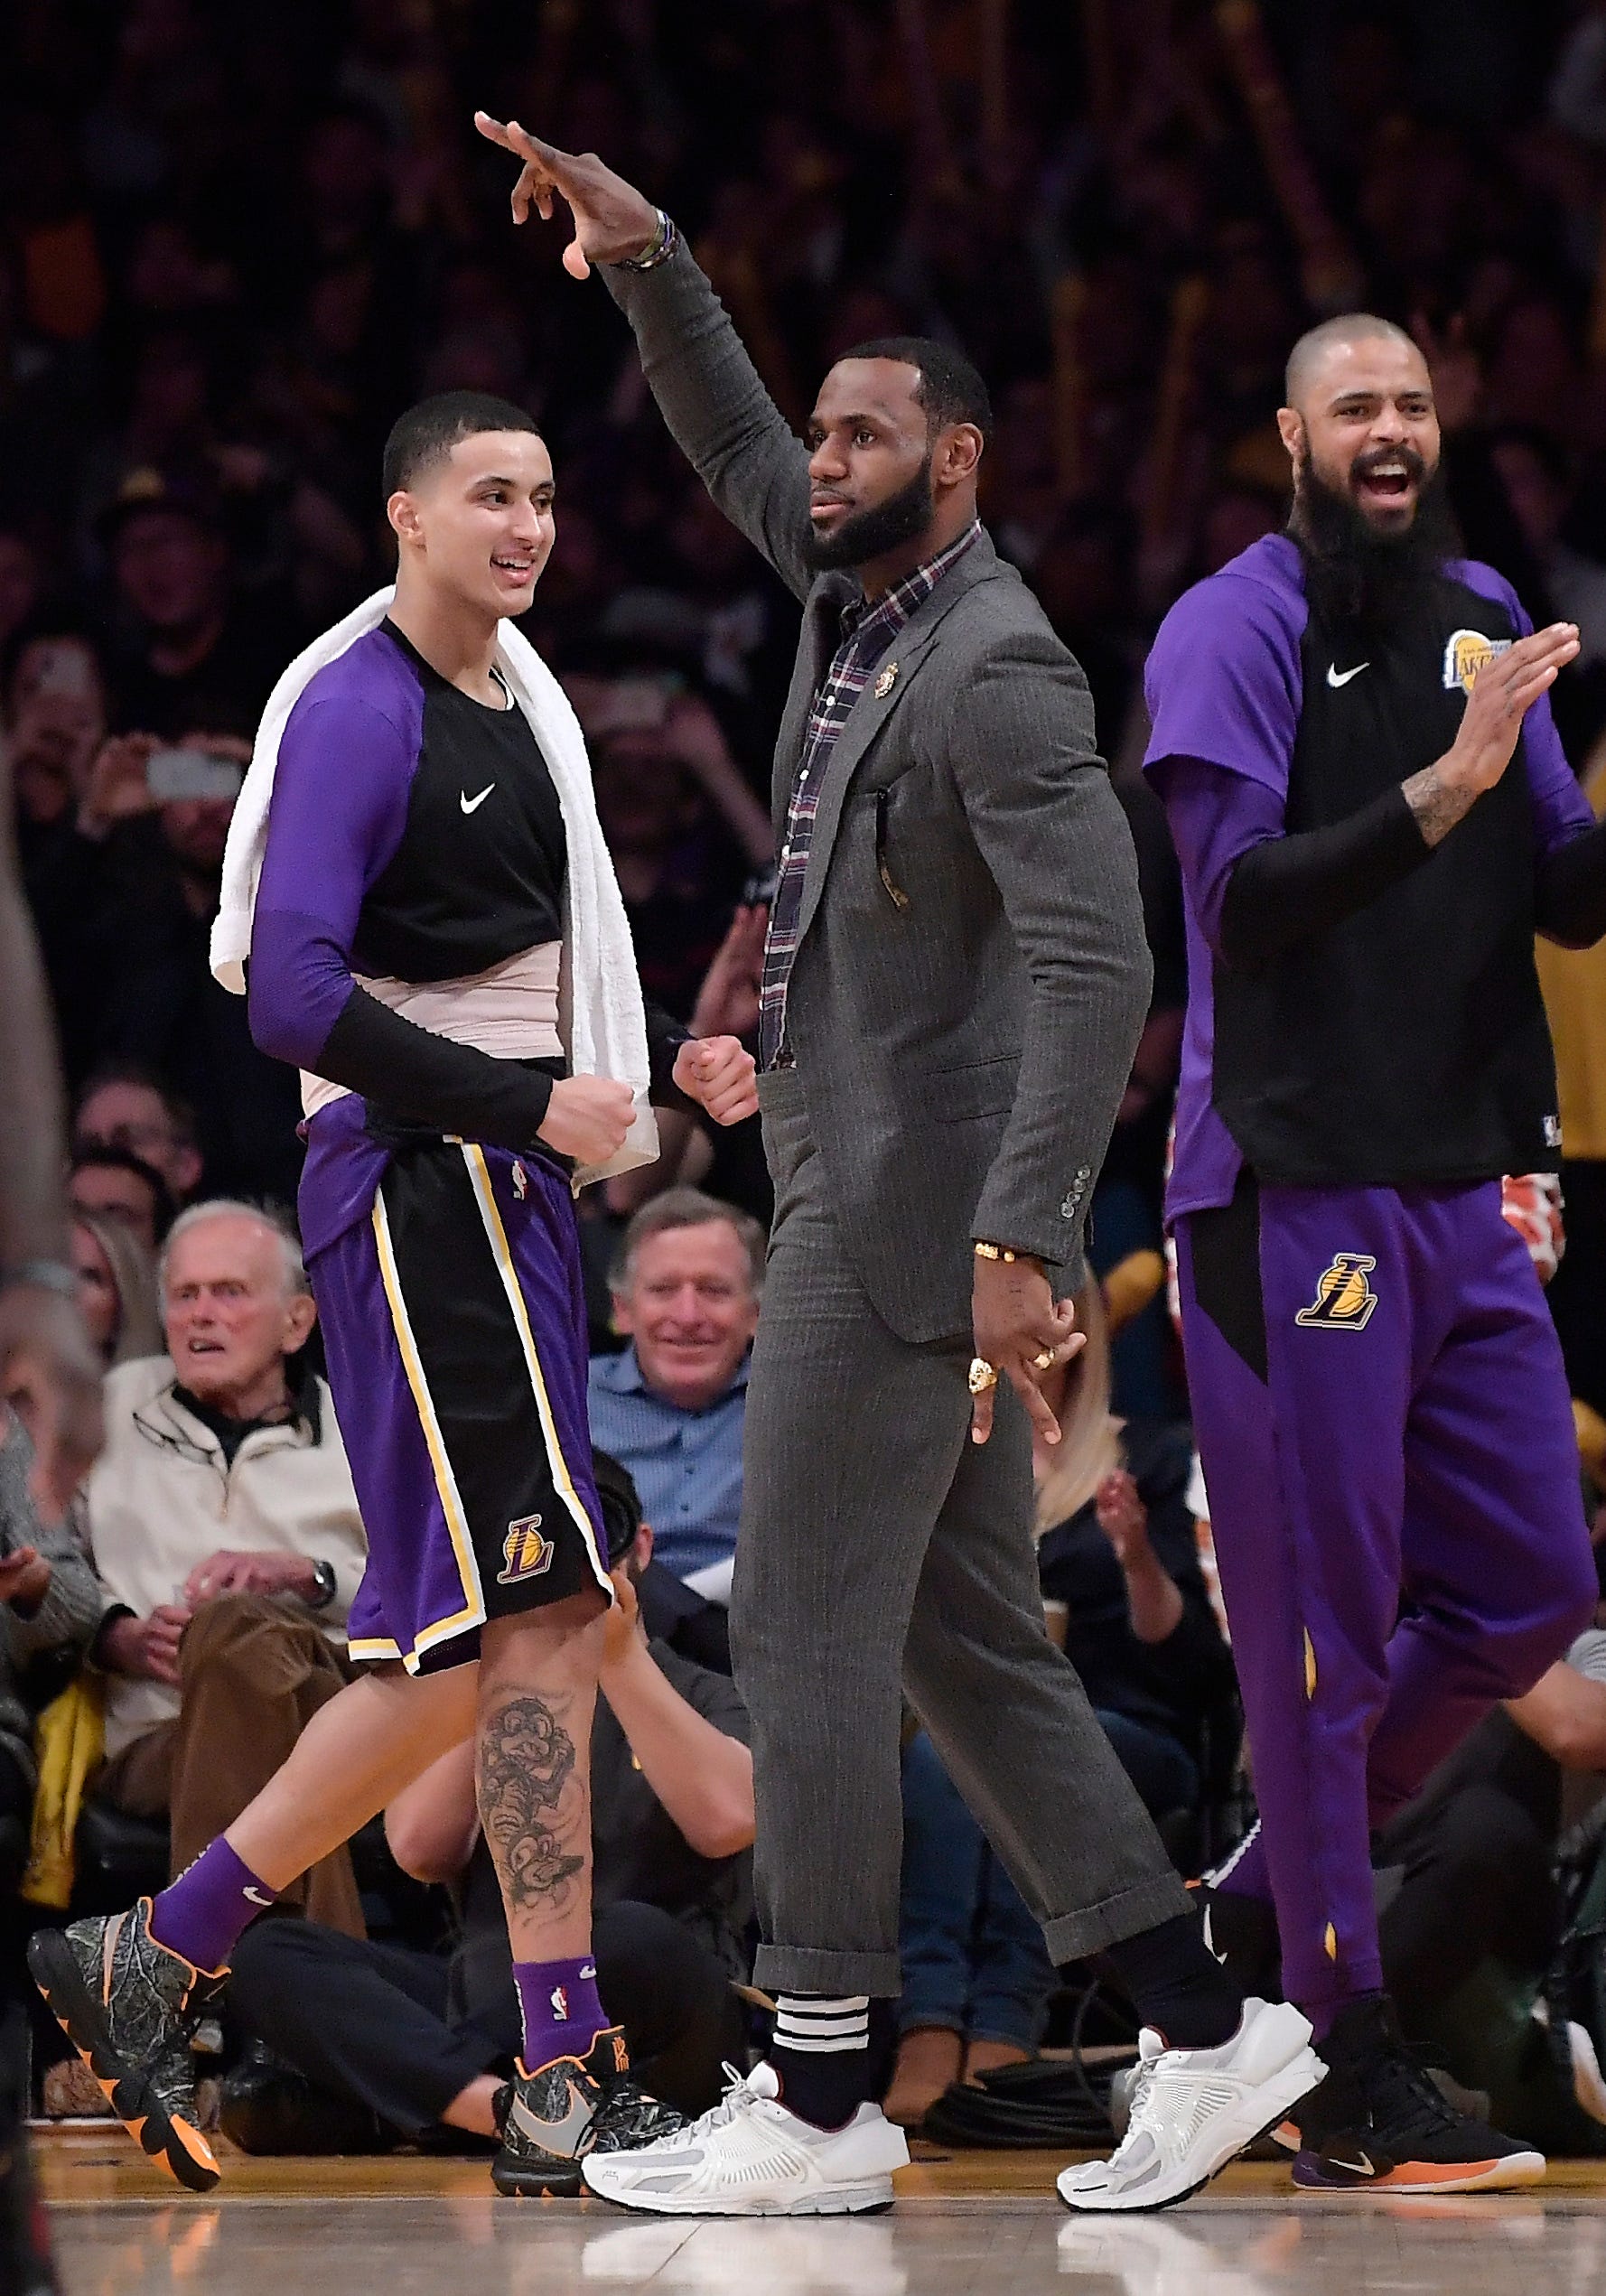 Los Angeles Lakers forward LeBron James, center, celebrates along with forward Kyle Kuzma, left, and center Tyson Chandler after the Lakers scored during the second half.